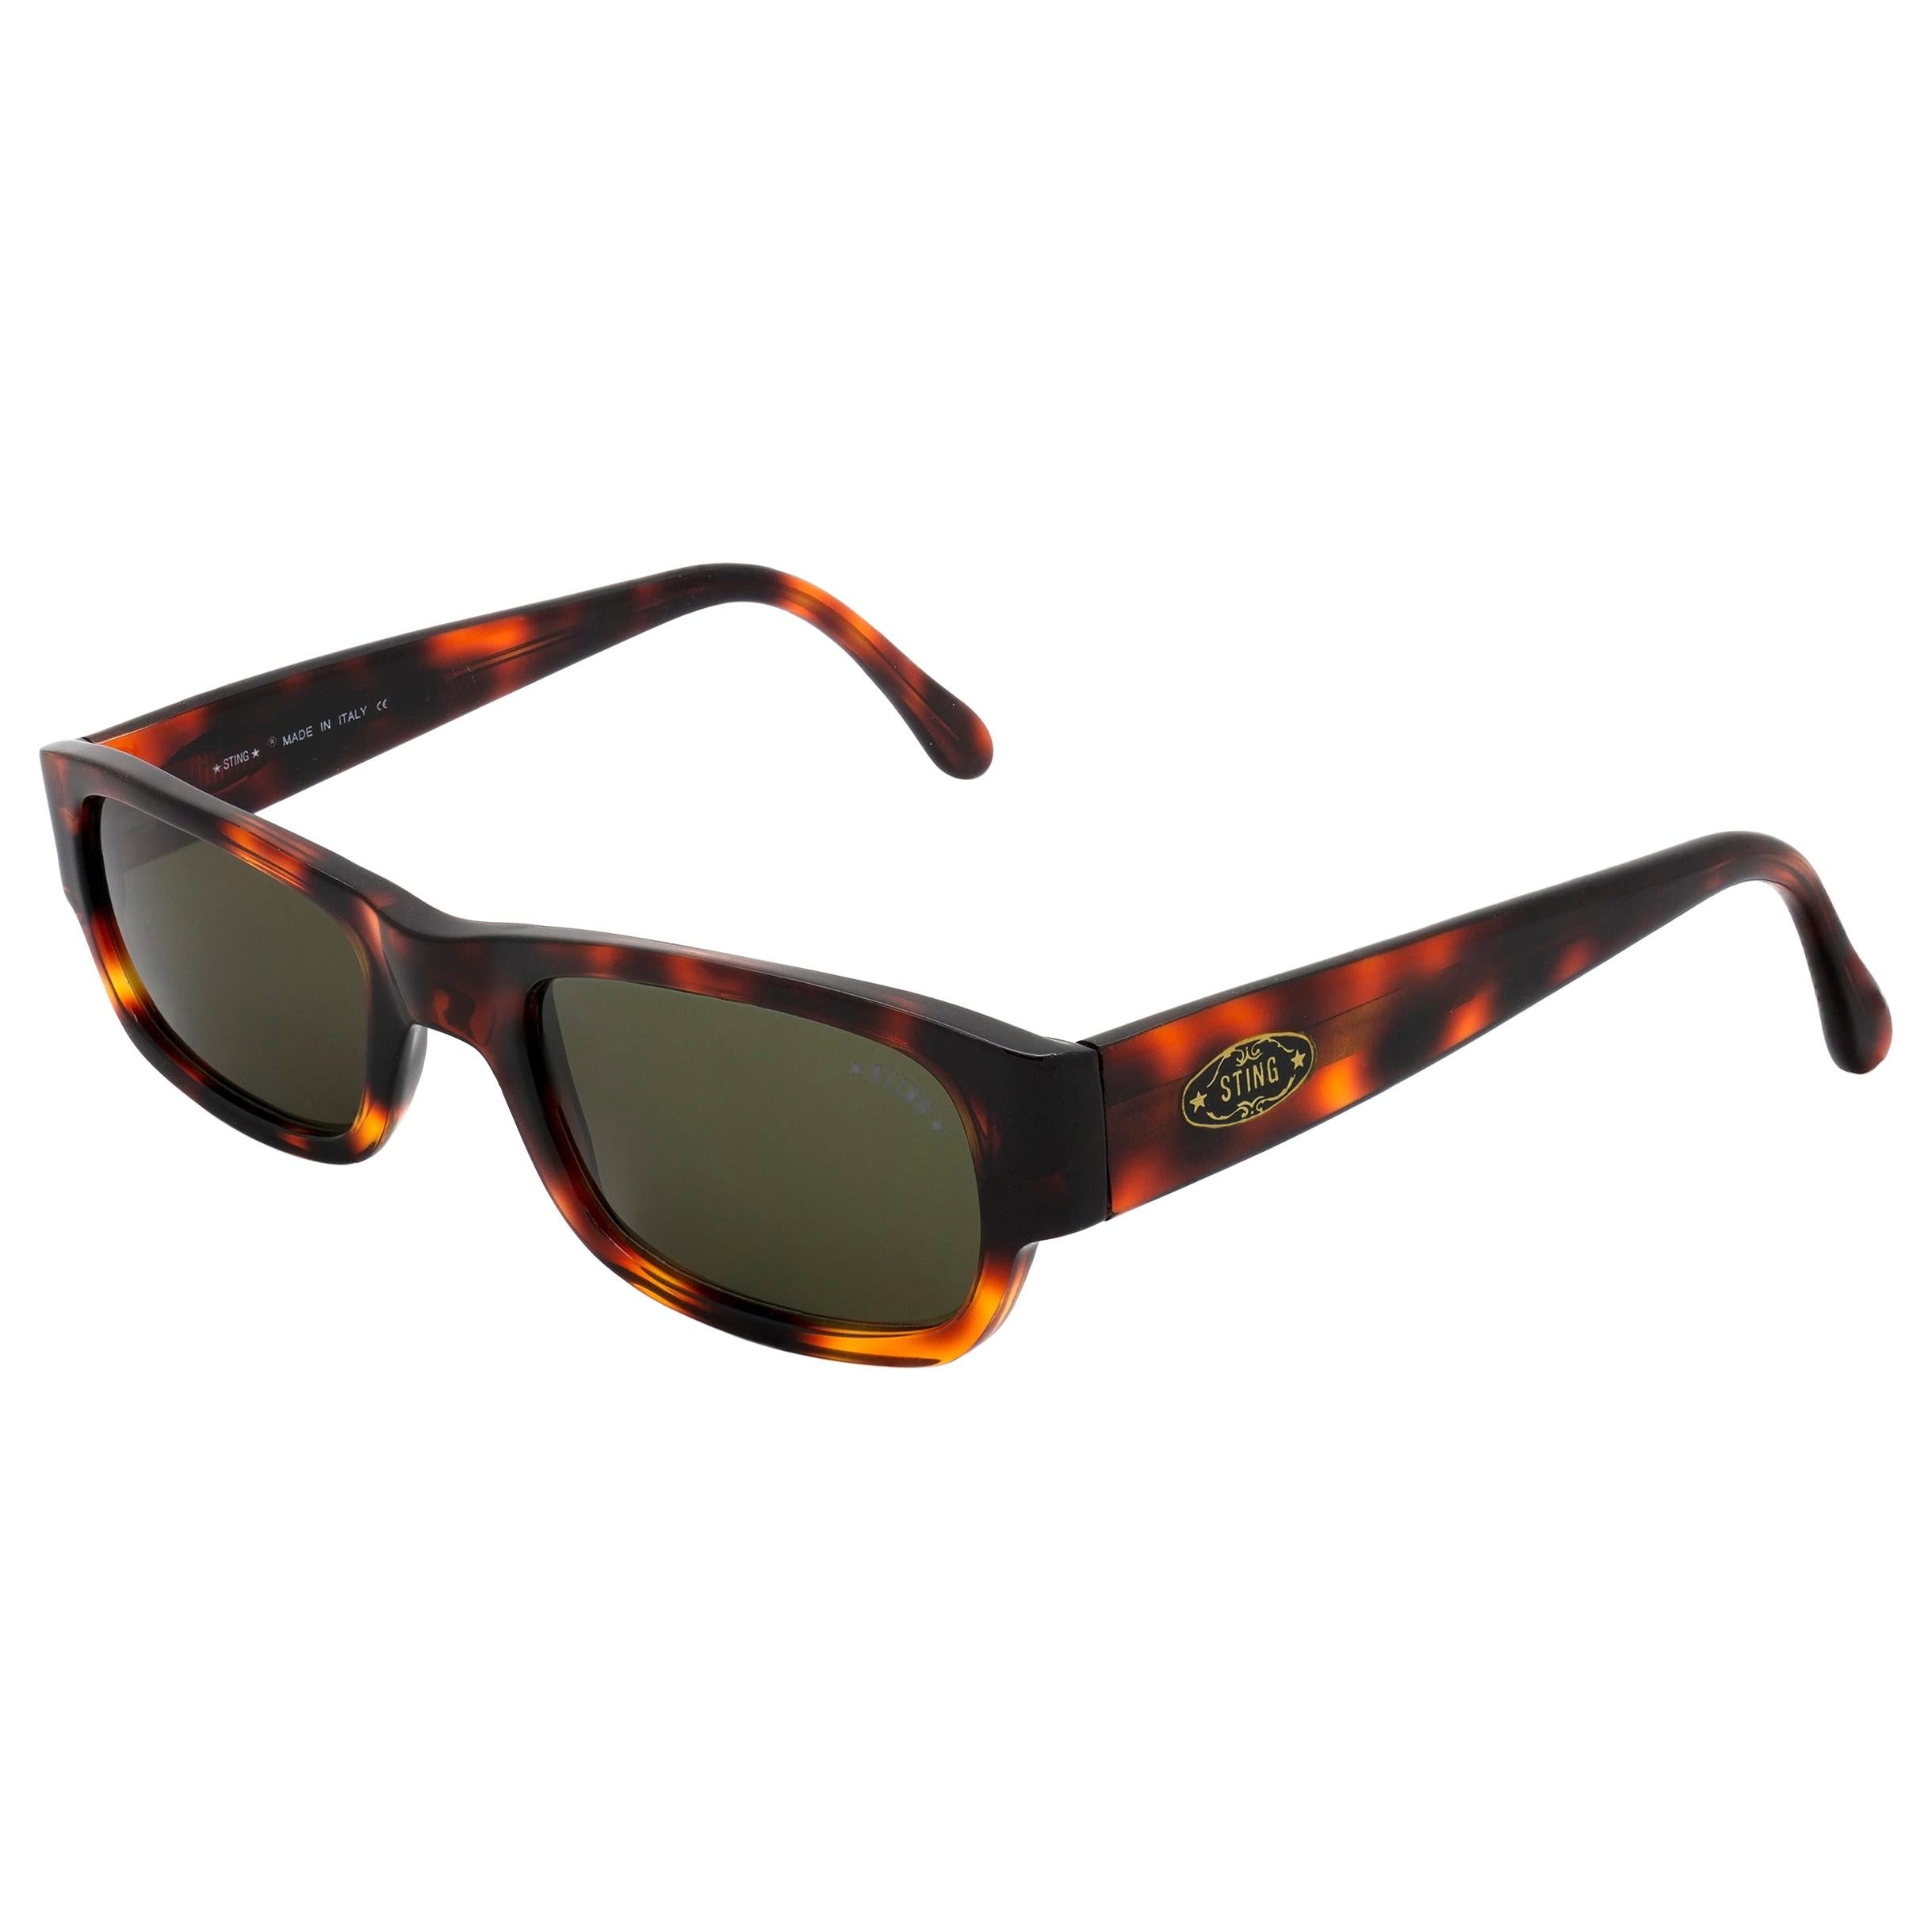 Sting narrow tortoise sunglasses, made in Italy For Sale